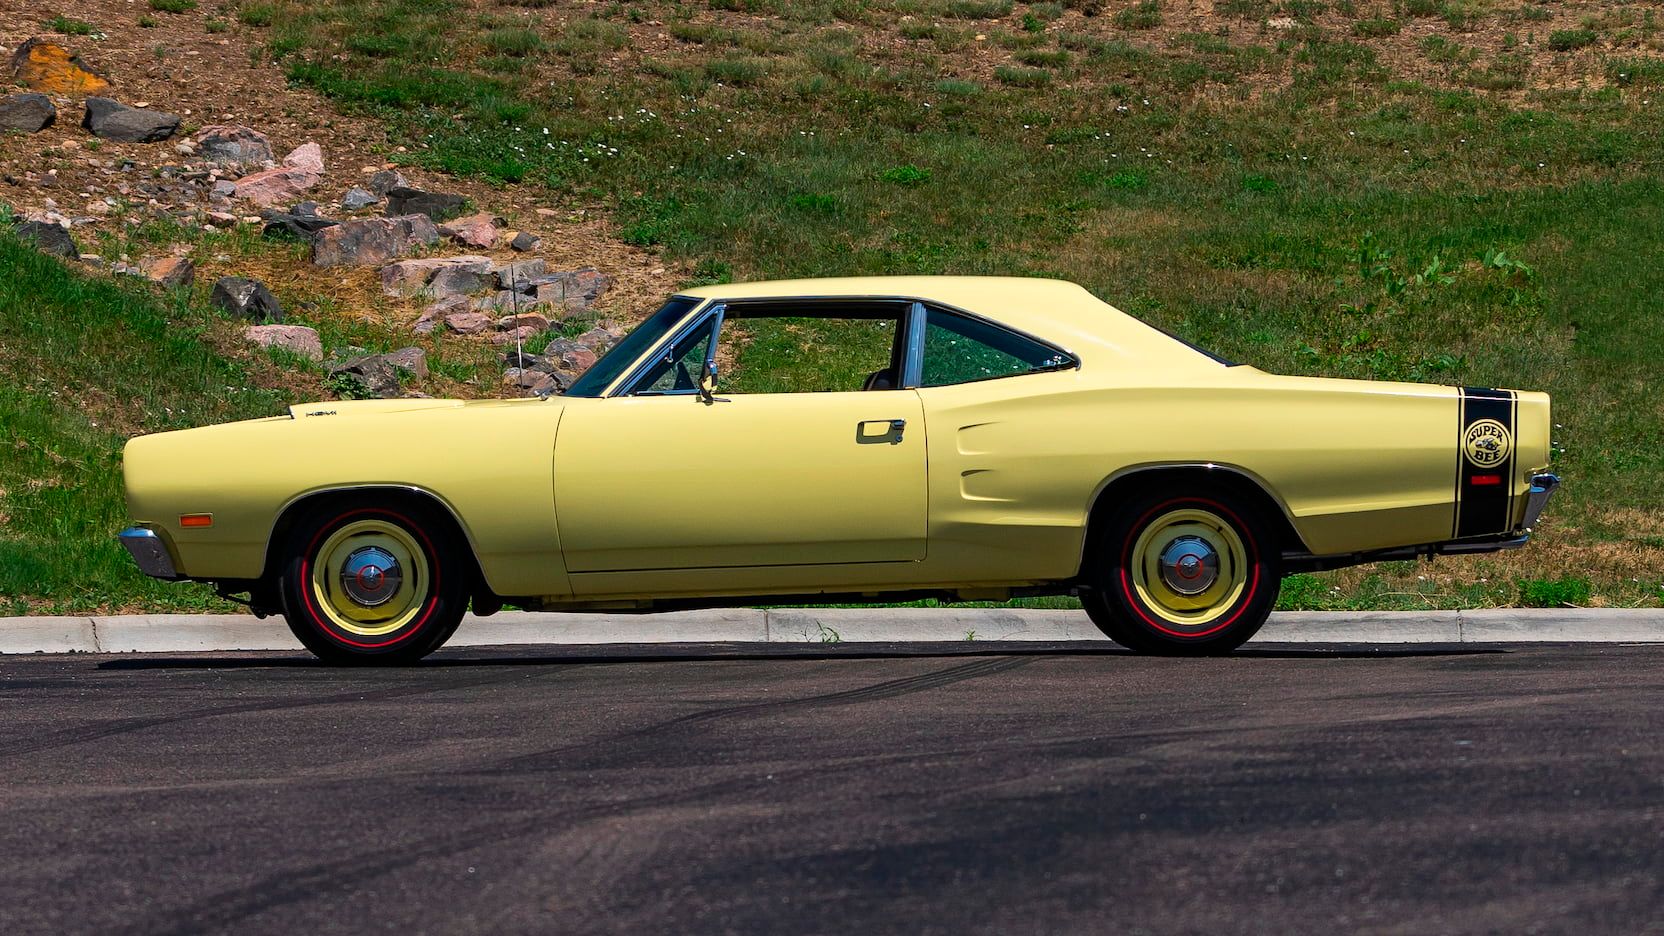 A parked 1969 Dodge Coronet Super Bee